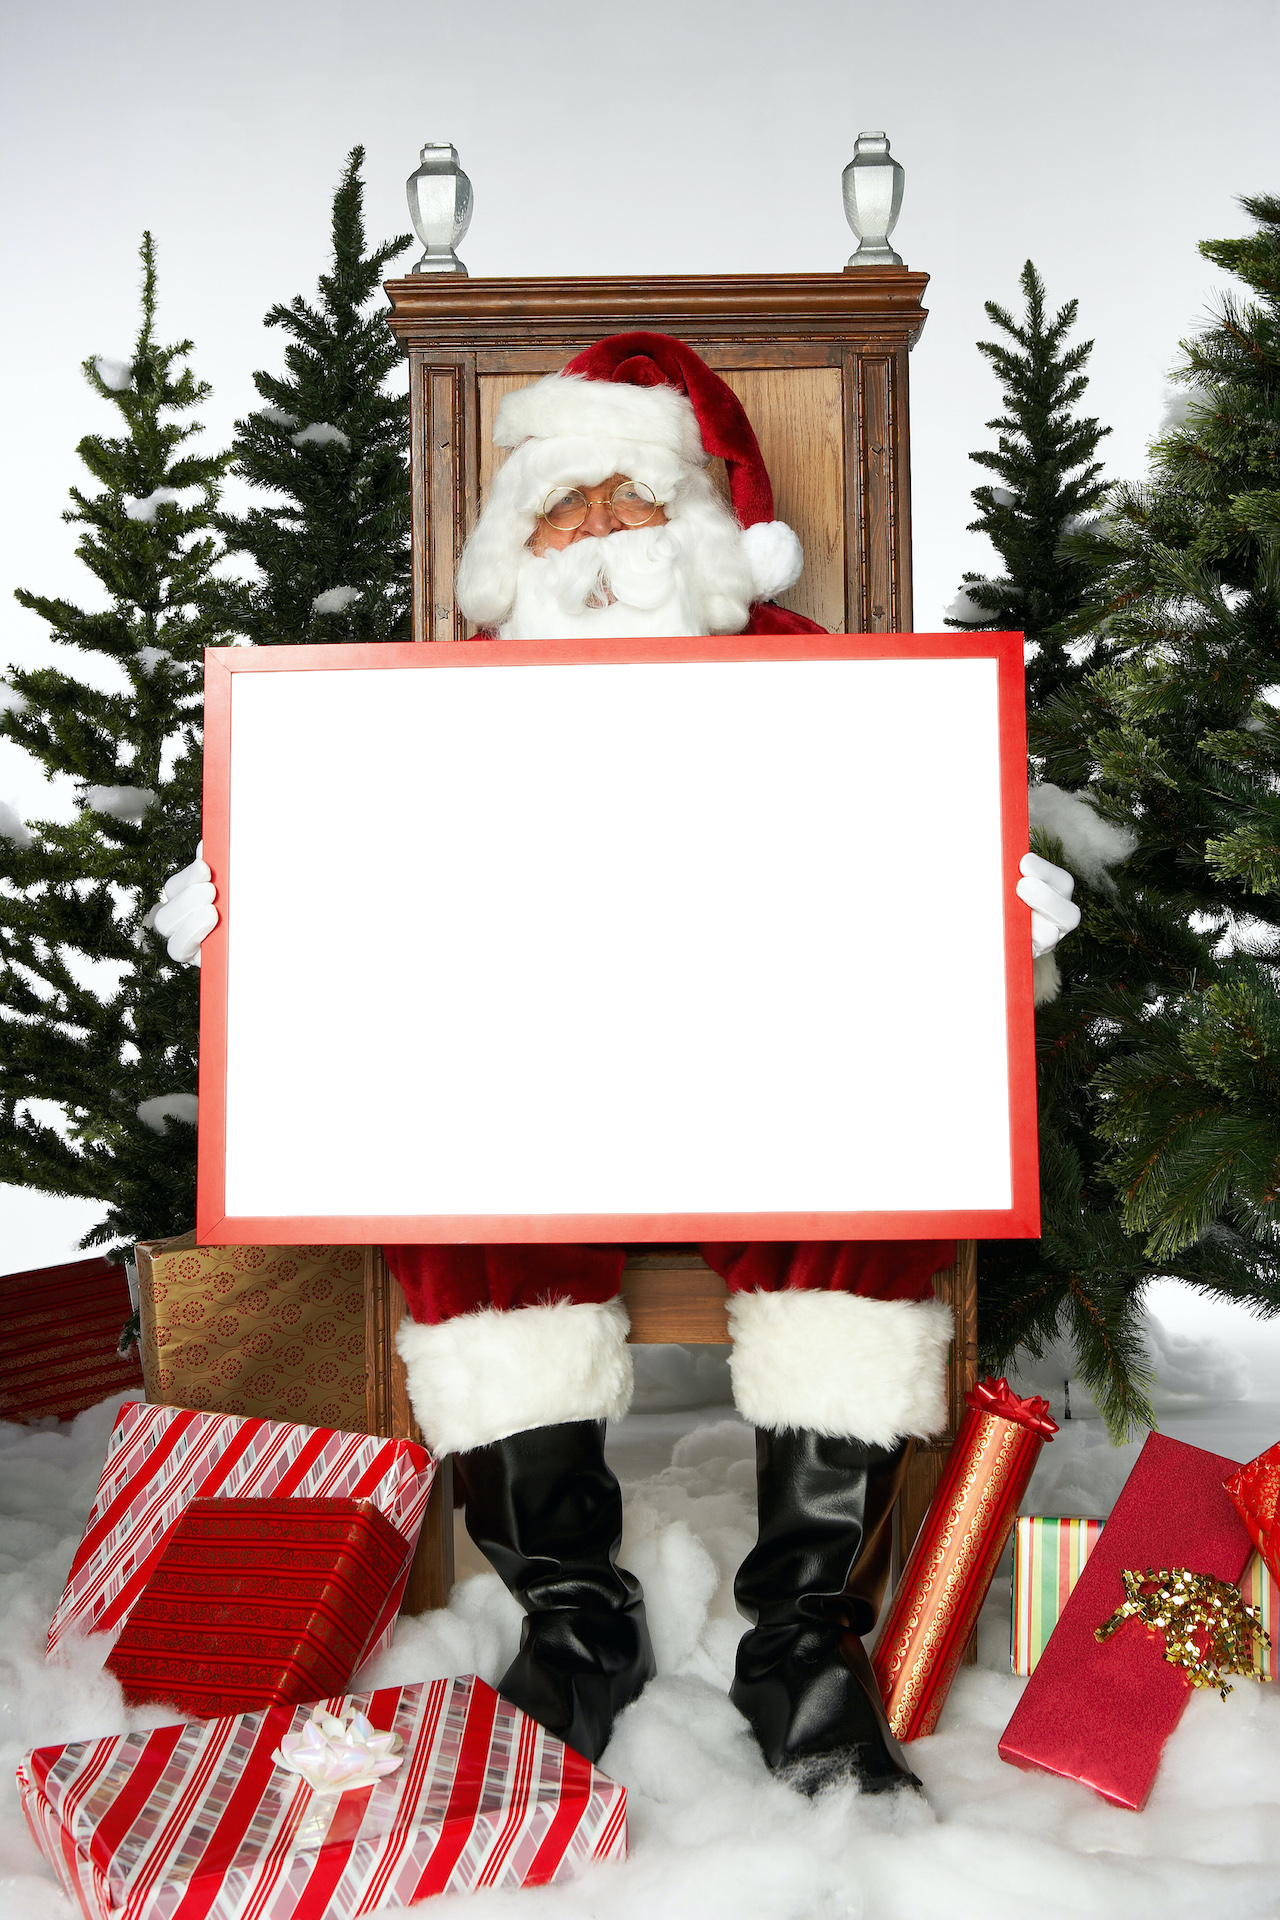 Portrait of Santa sitting on his chair surrounded by presents holding a large canvas